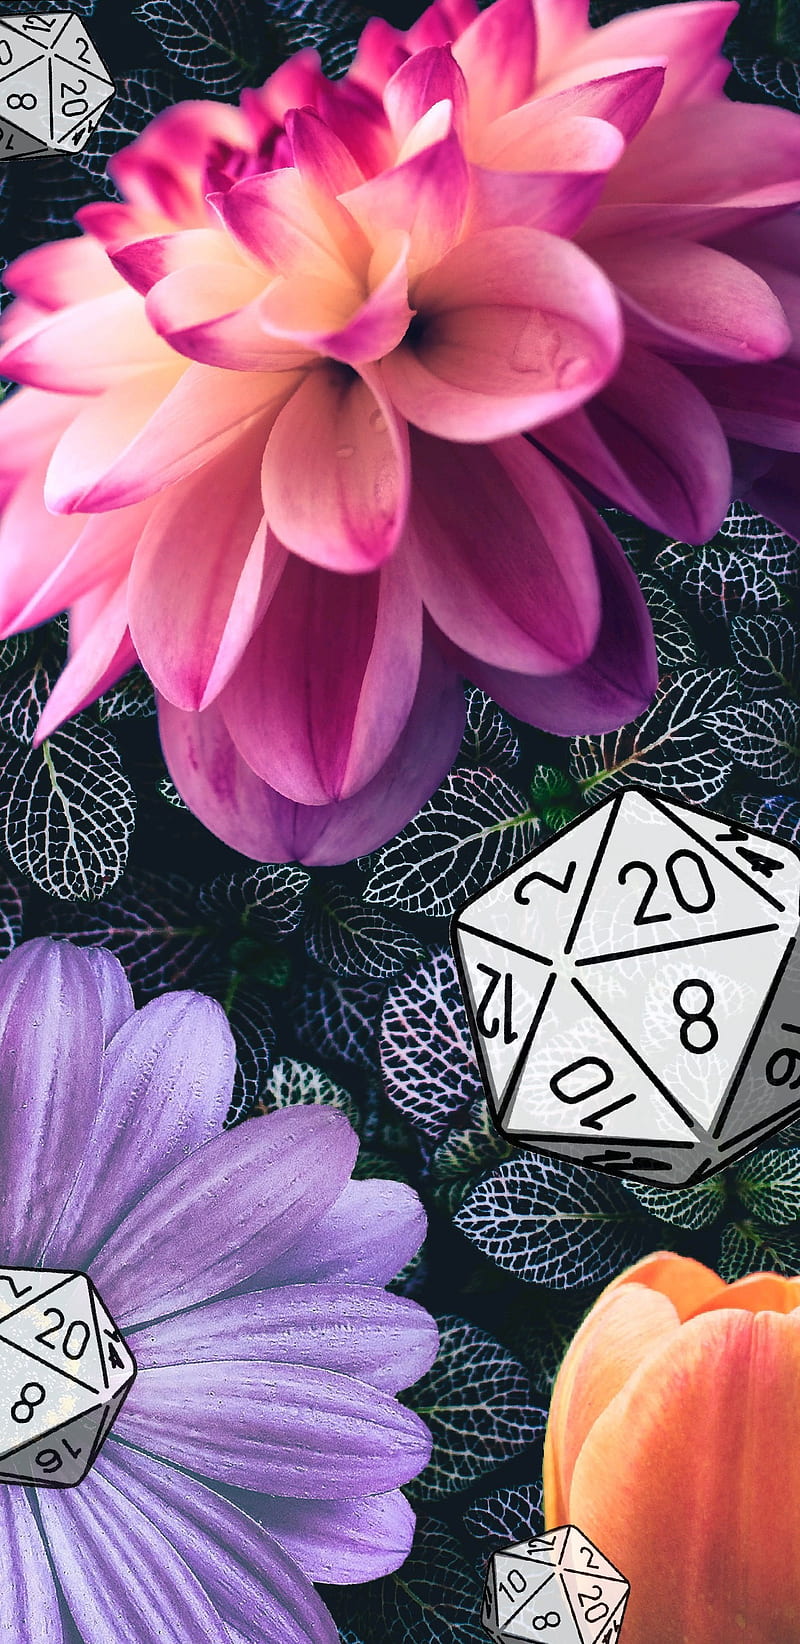 Flowers and Dice, d20, dm, dragons, dungeons, flower, nature, rpg, HD phone wallpaper